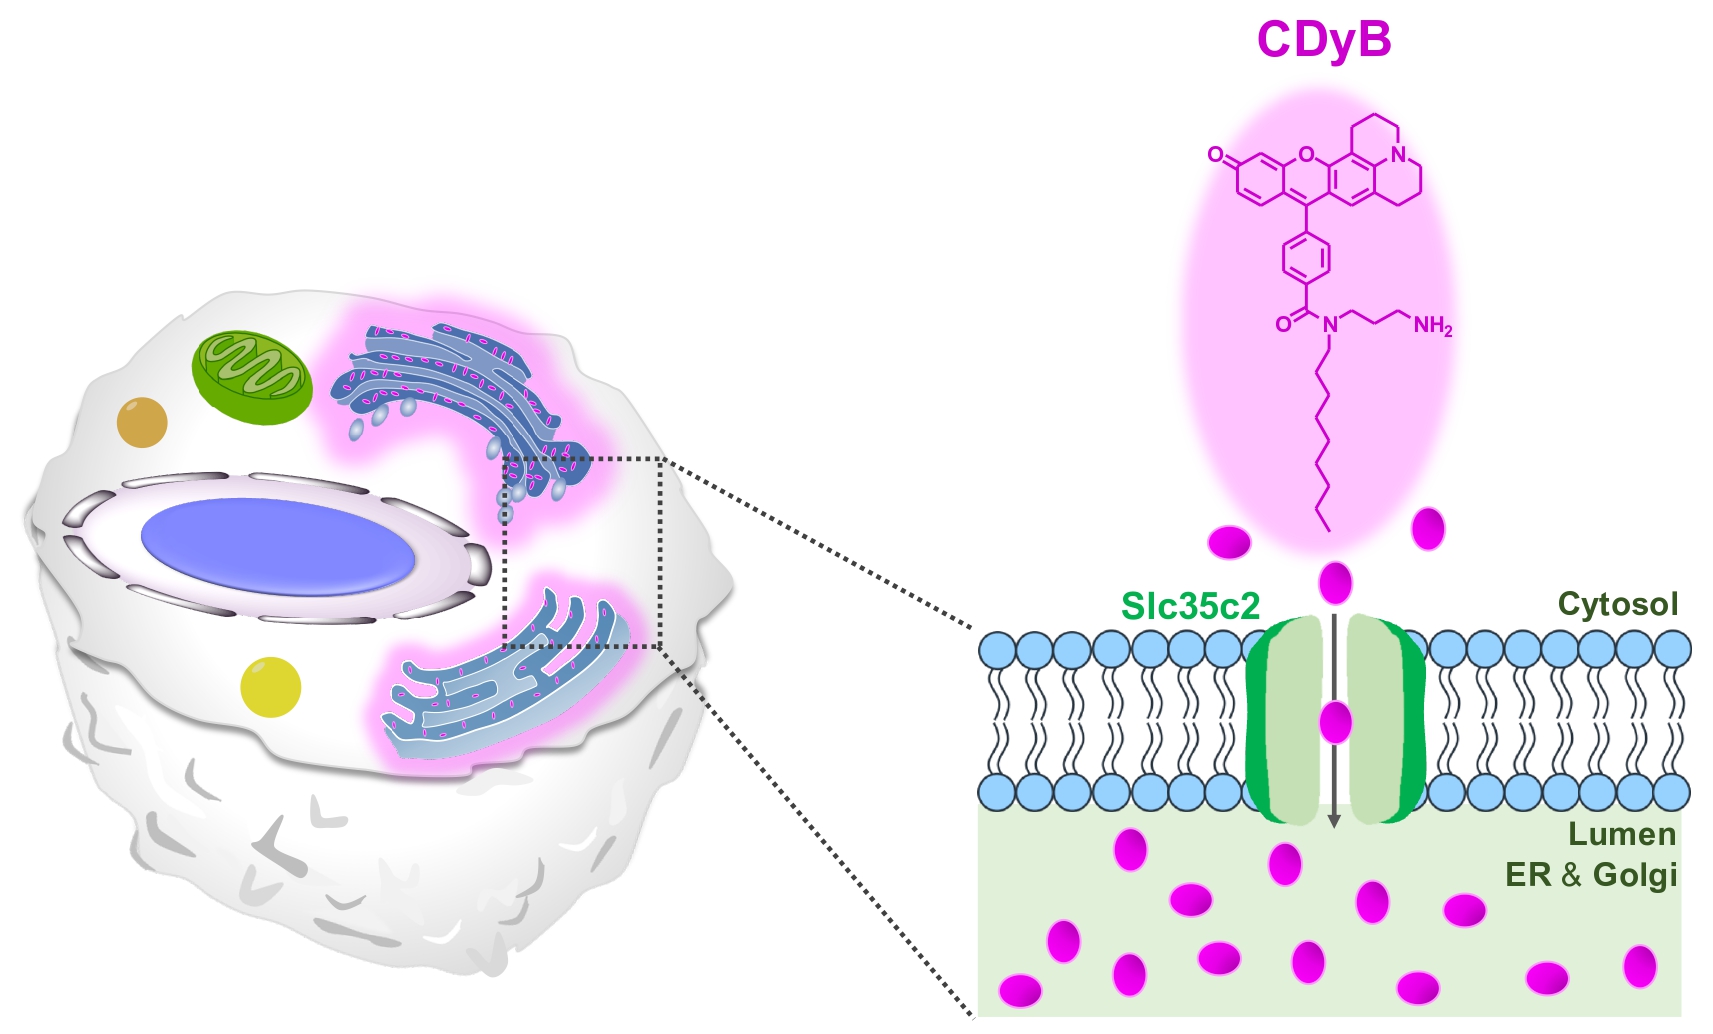 Figure 1. The proposed staining mechanism of CDyB